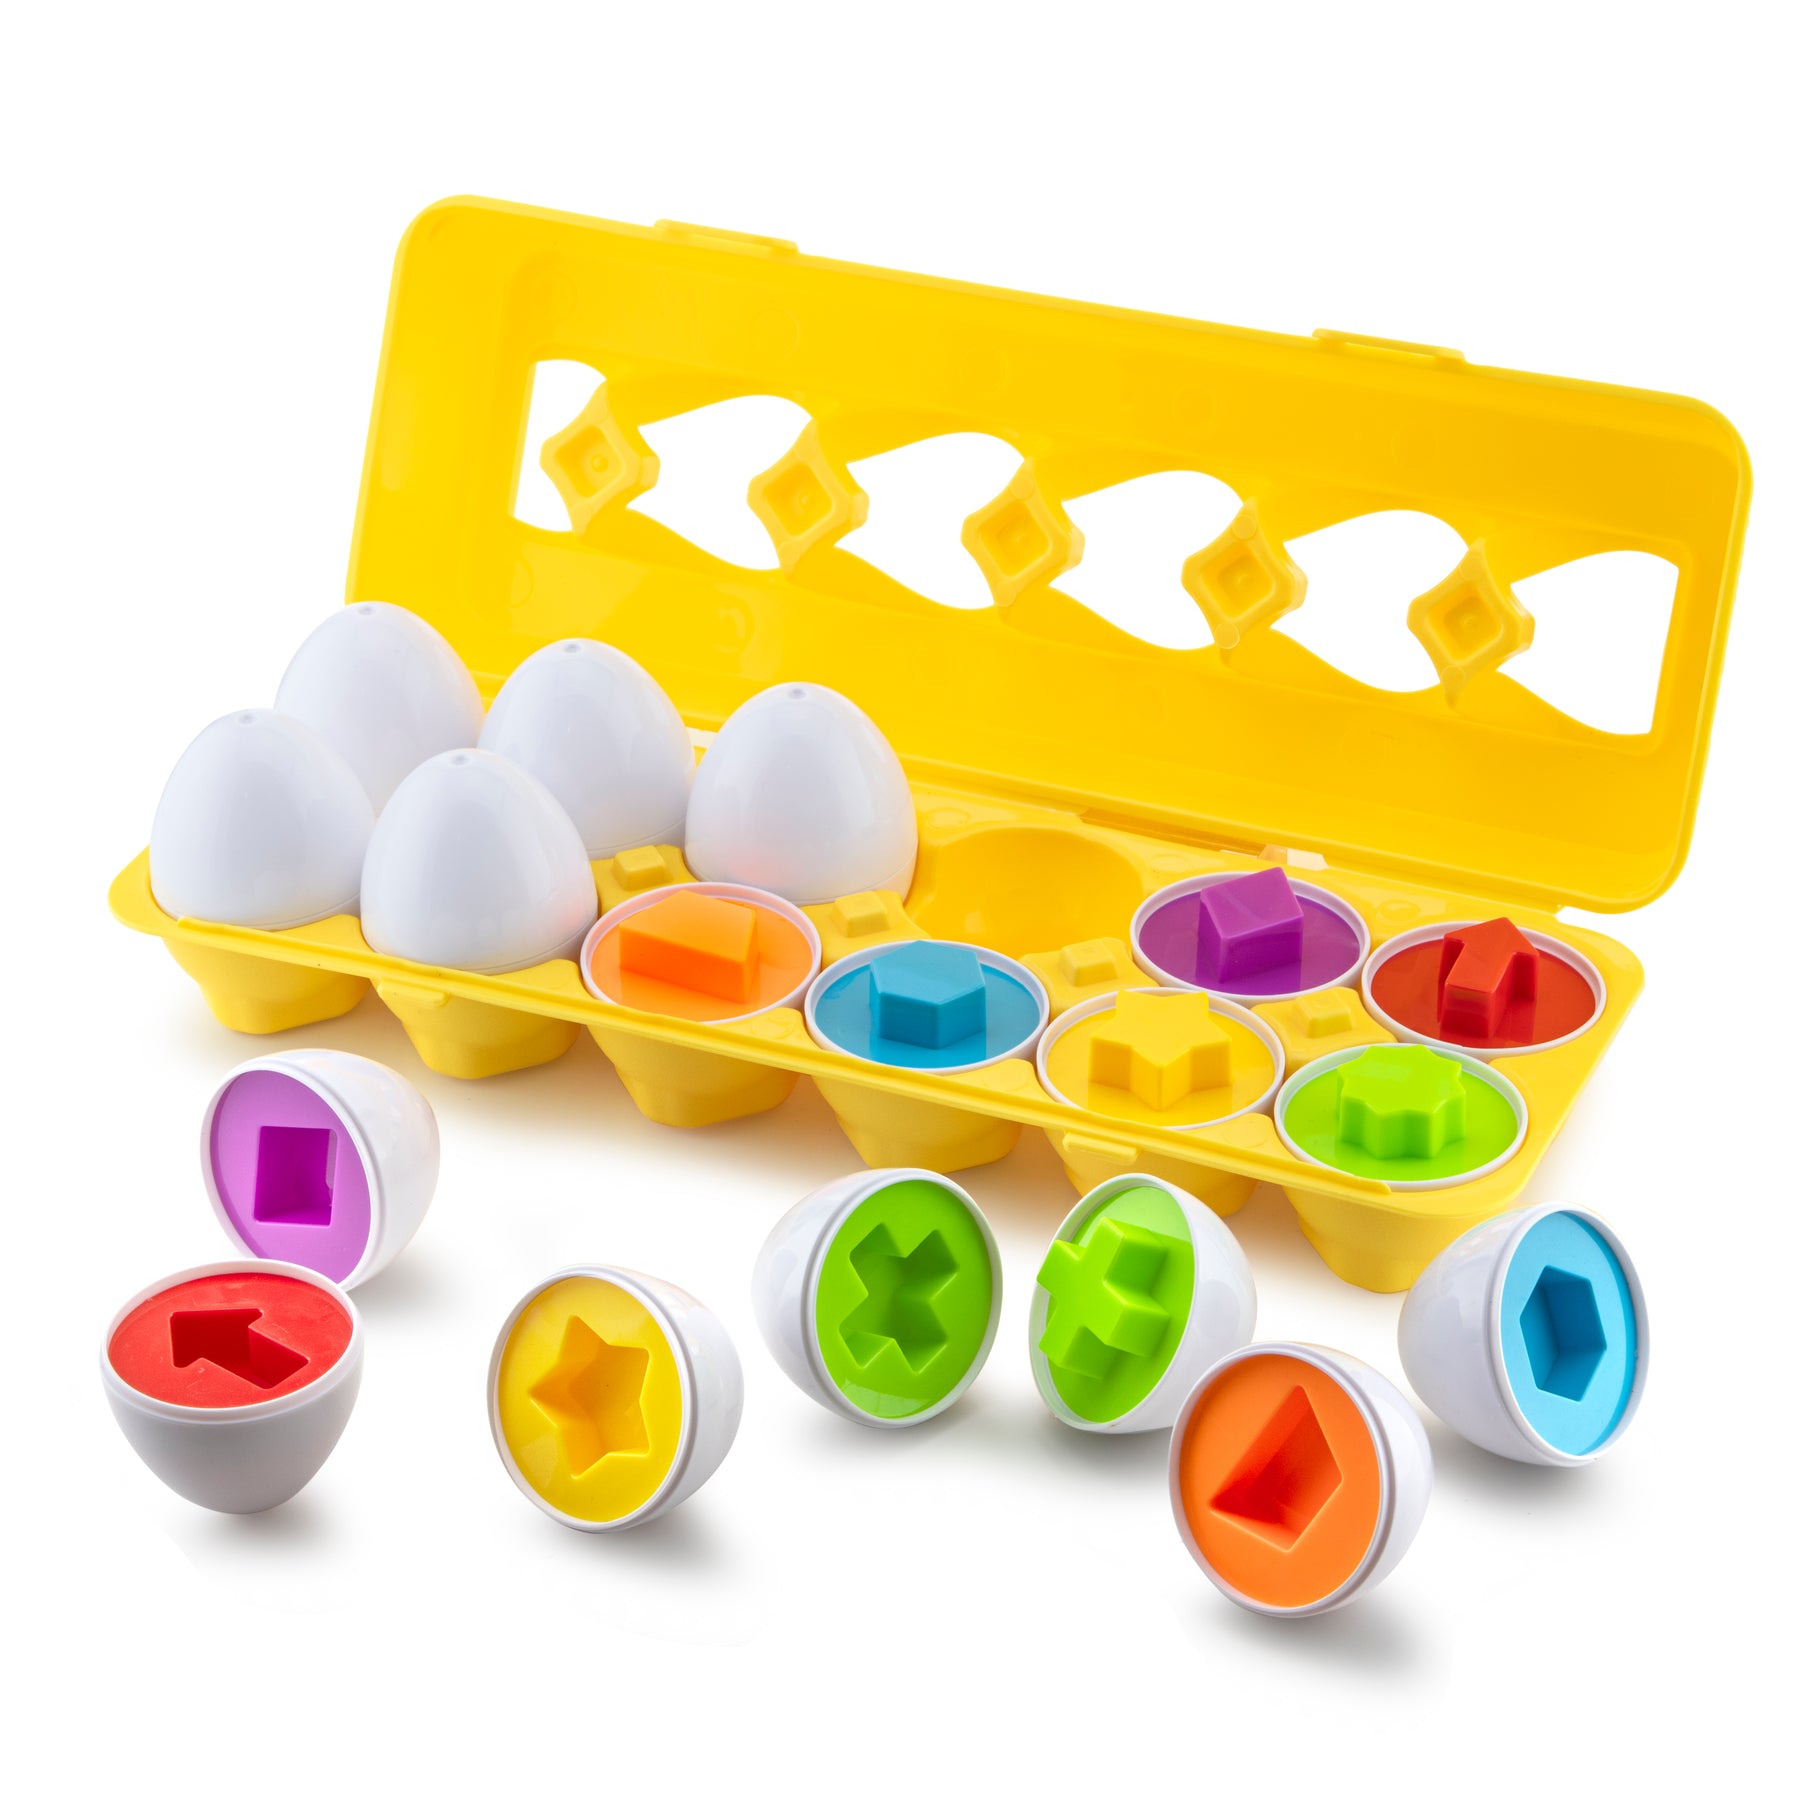 Playdate Matching Eggs Educational Toys